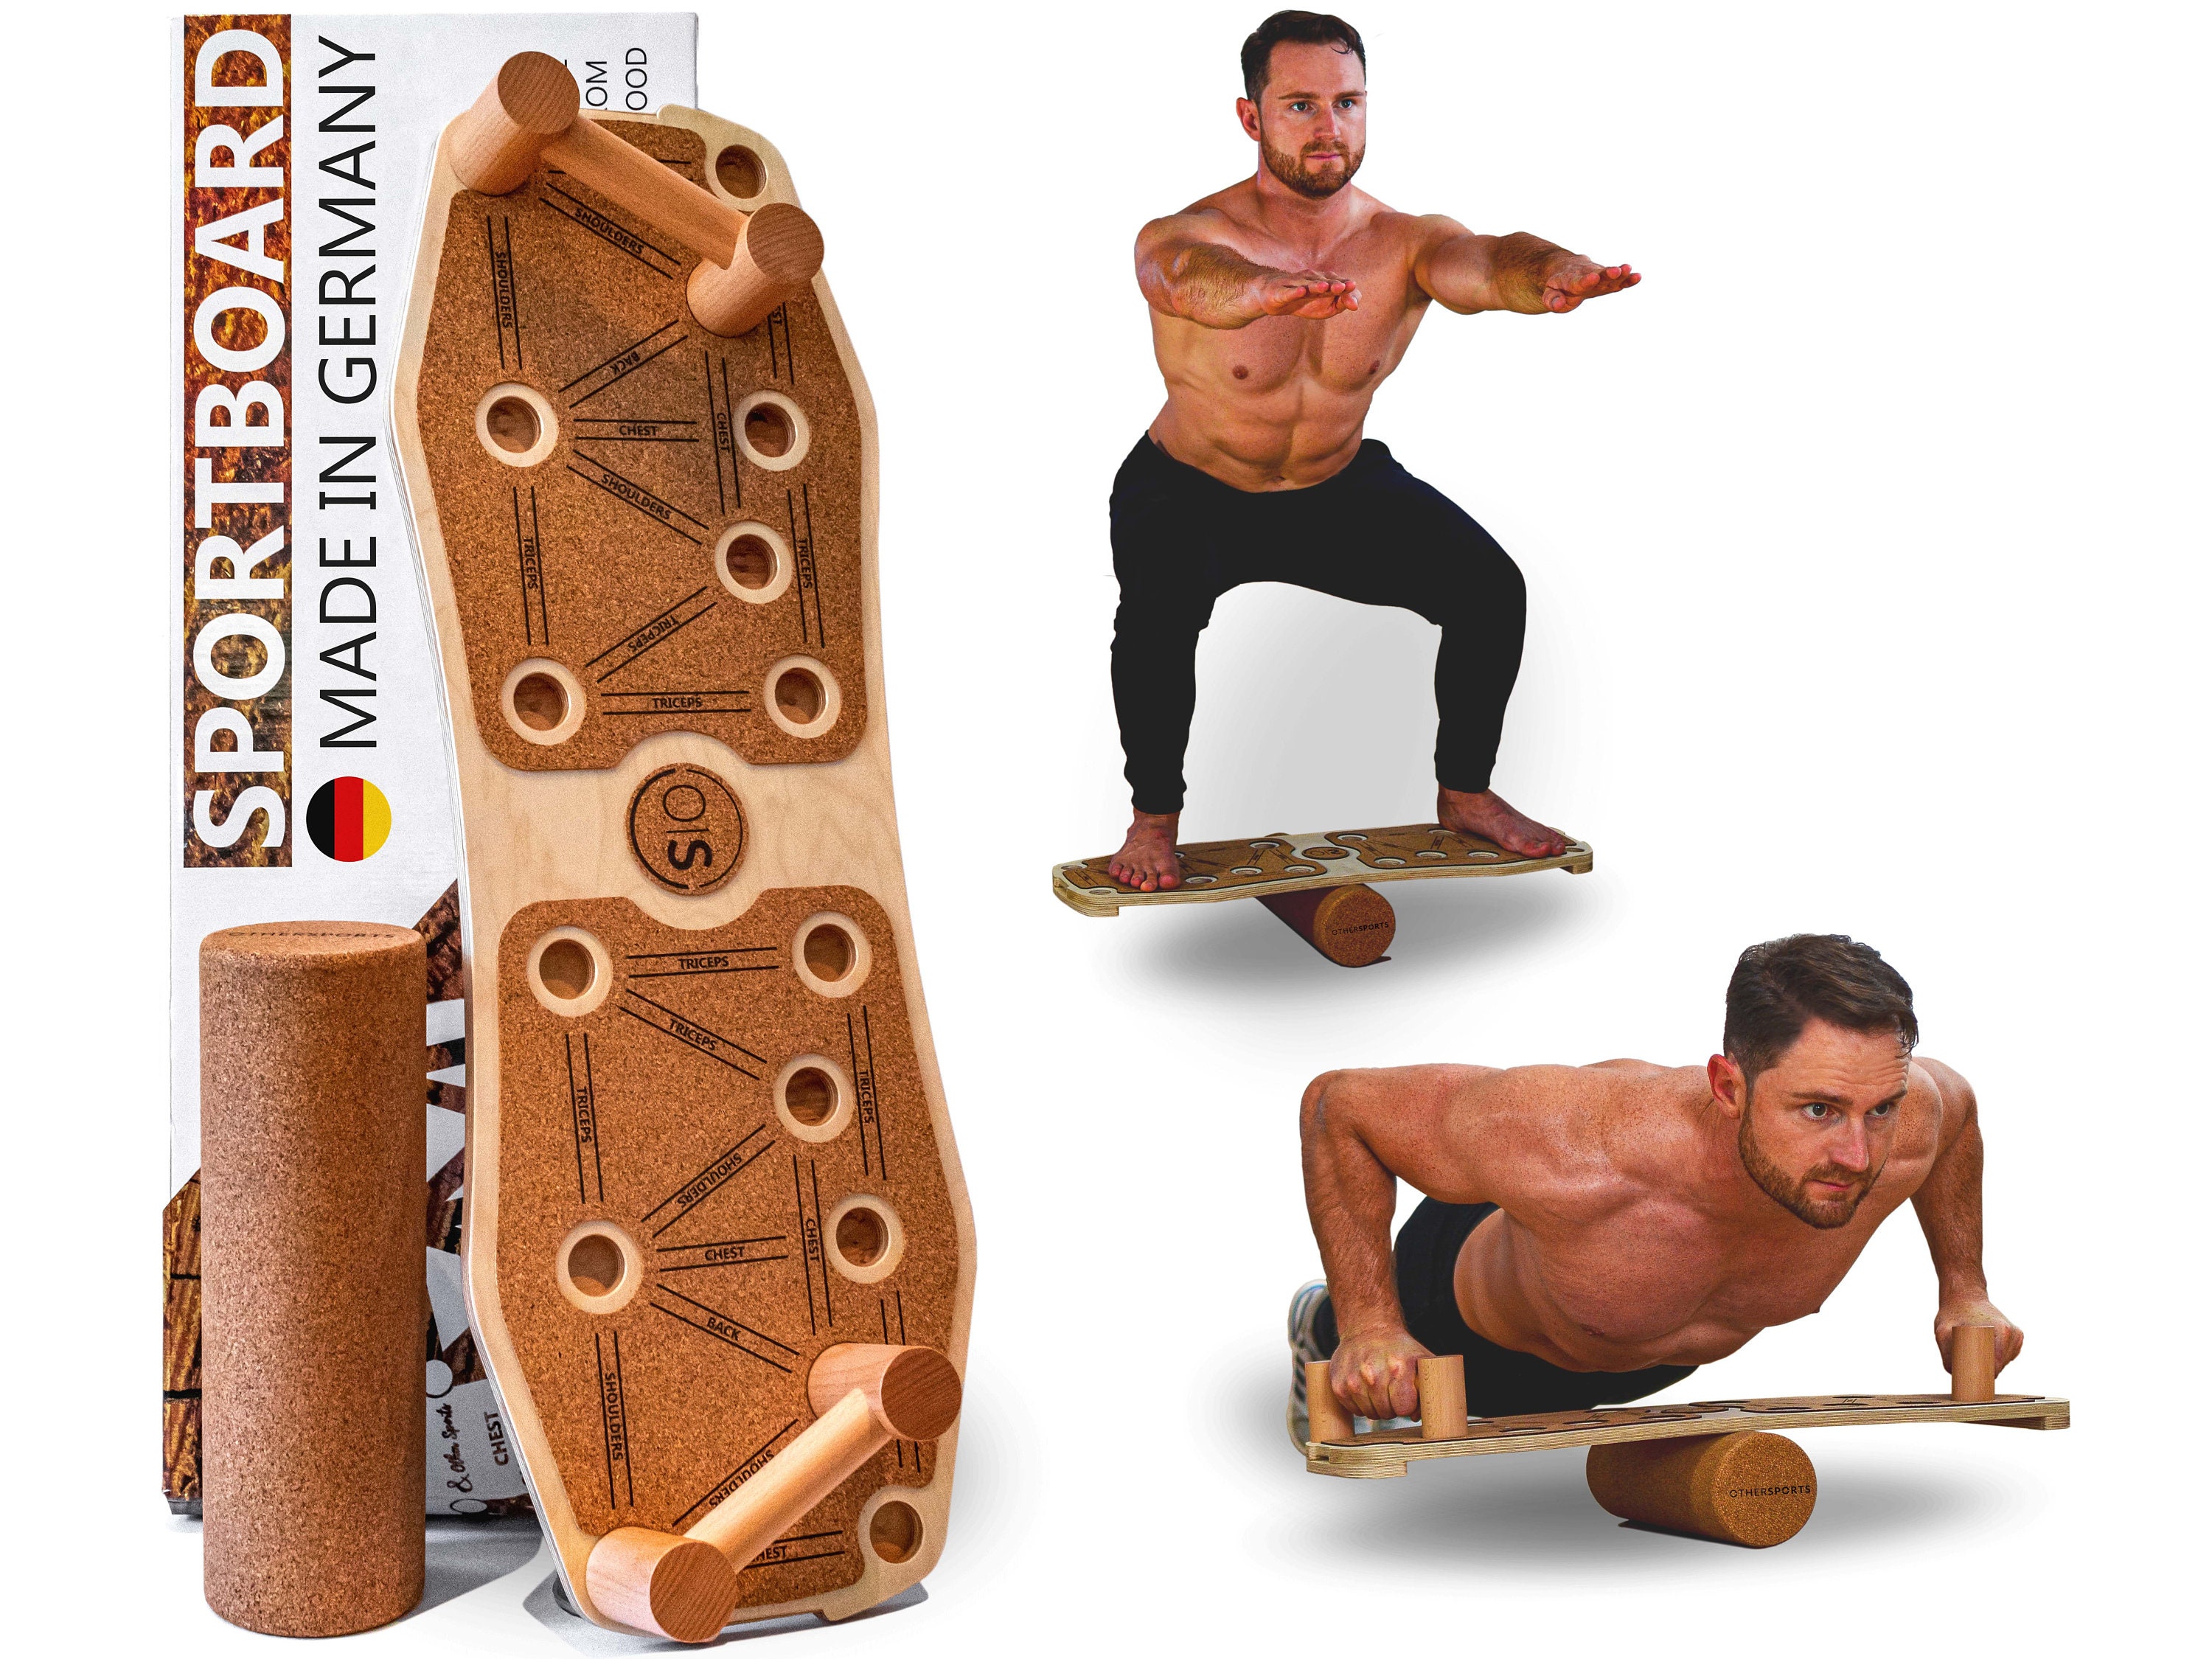 SPORTBOARD Handmade Fitness Equipment Made of 100% Real Wood hq image